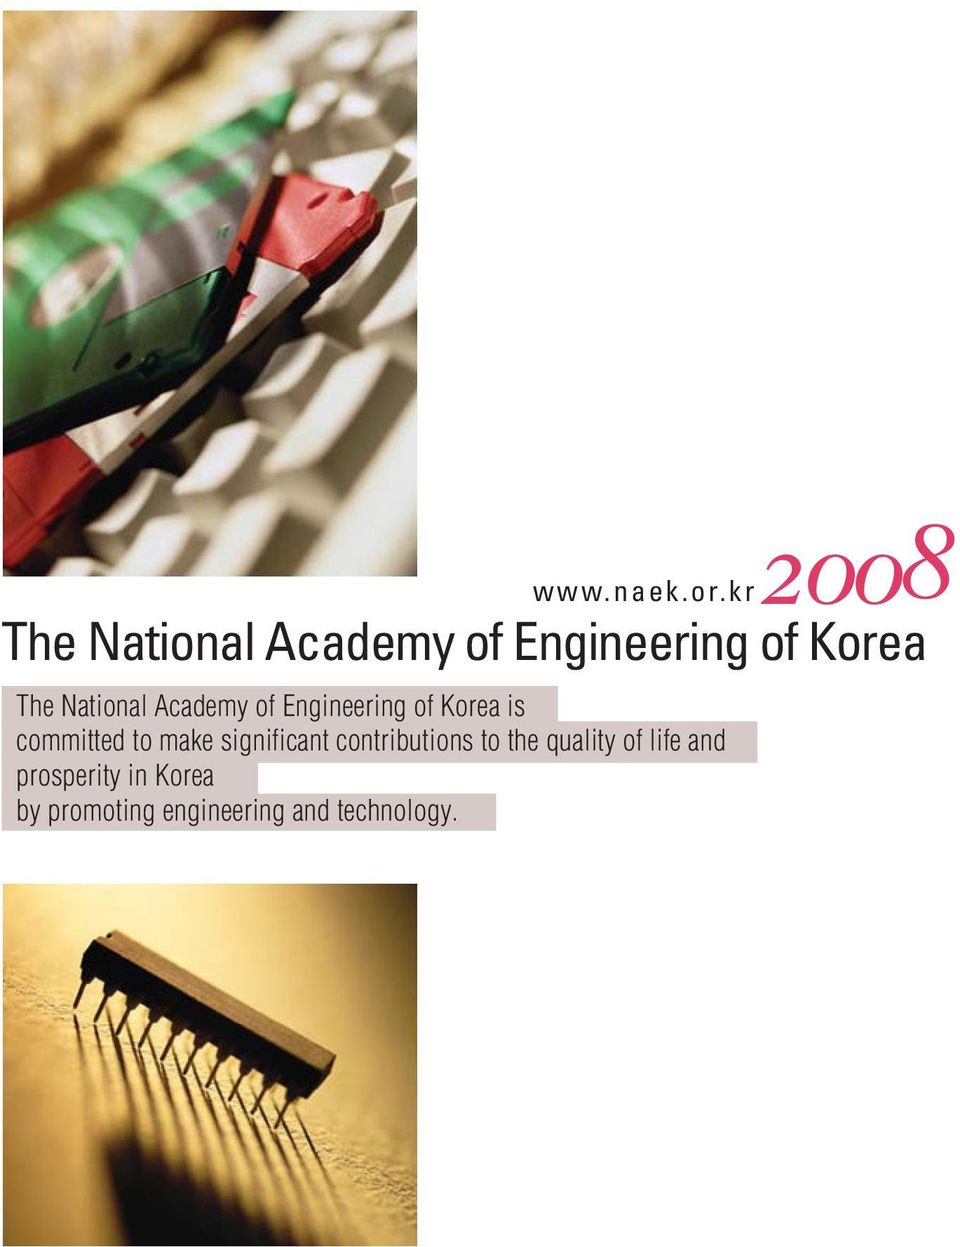 National Academy of Engineering of Korea is committed to